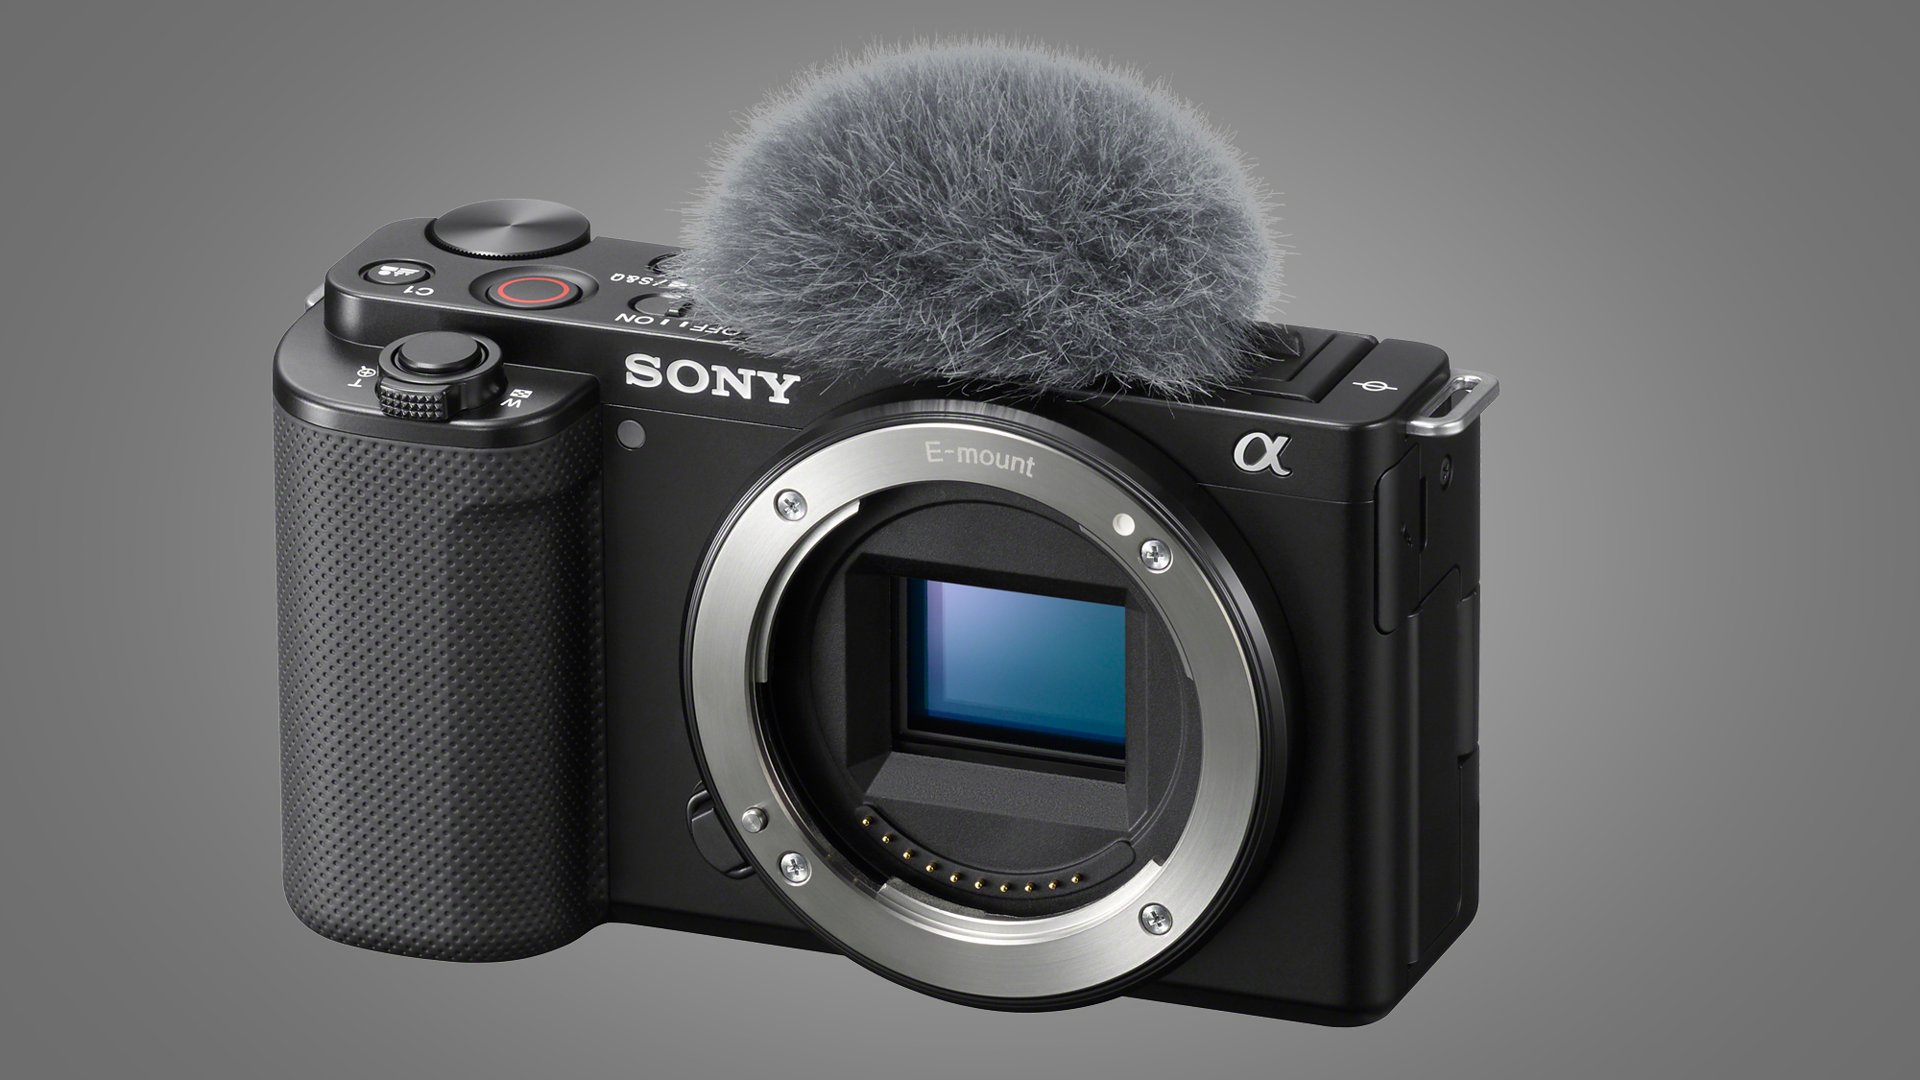 The Sony ZV-E10 vlogging camera without lens